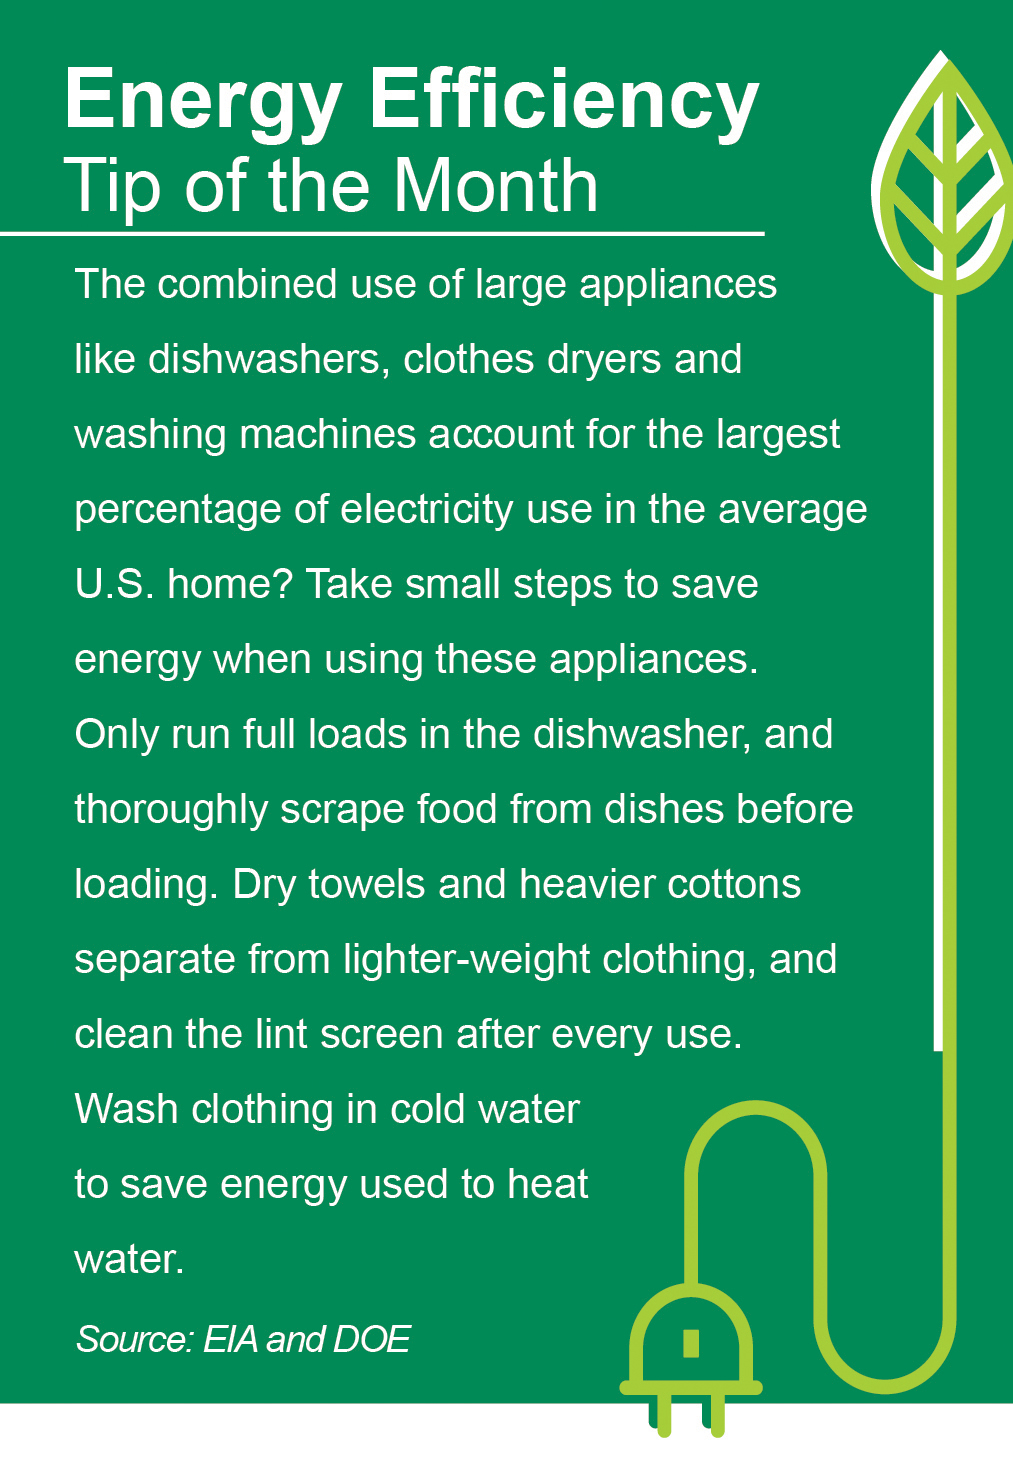 Energy Efficiency Tip of the Month: The combined use of large appliances like dishwasheers, clothes dryers, and washingngg machines  account for the largest percentage of electricity use in the average U.S. home? Take small steps to save energy when using these appliances. Only run full loads in the dishwasher, and thoroughly scrape food from dishes before loading. Dry towels and heavier cottons separate from lighter-weight clothing, and clean the lint screen after every use. Wash clothing in cold water to save energy used to heat water. Source: EIA and DOE